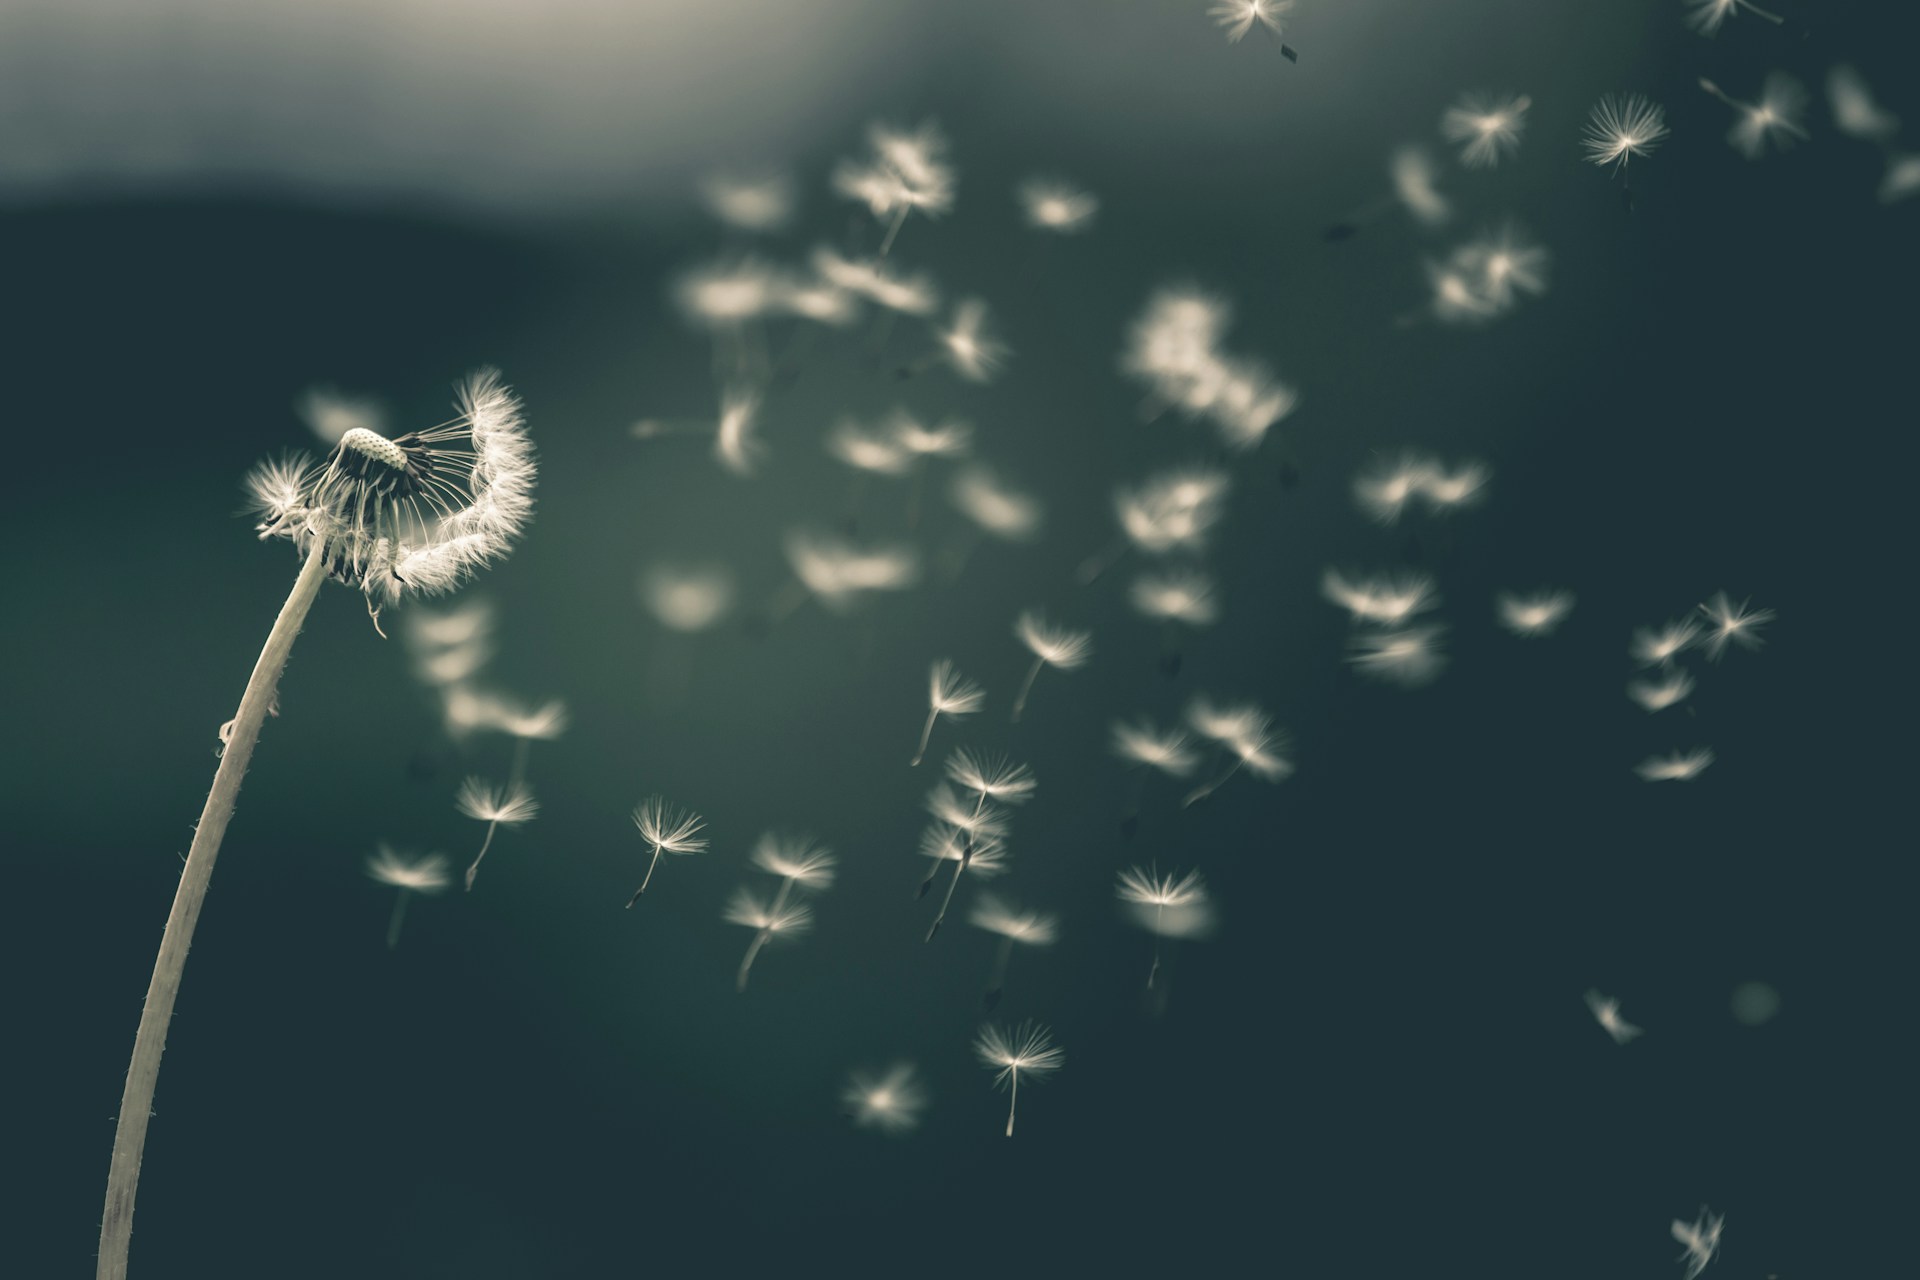 image of a dandelion and its petals floating in the breeze